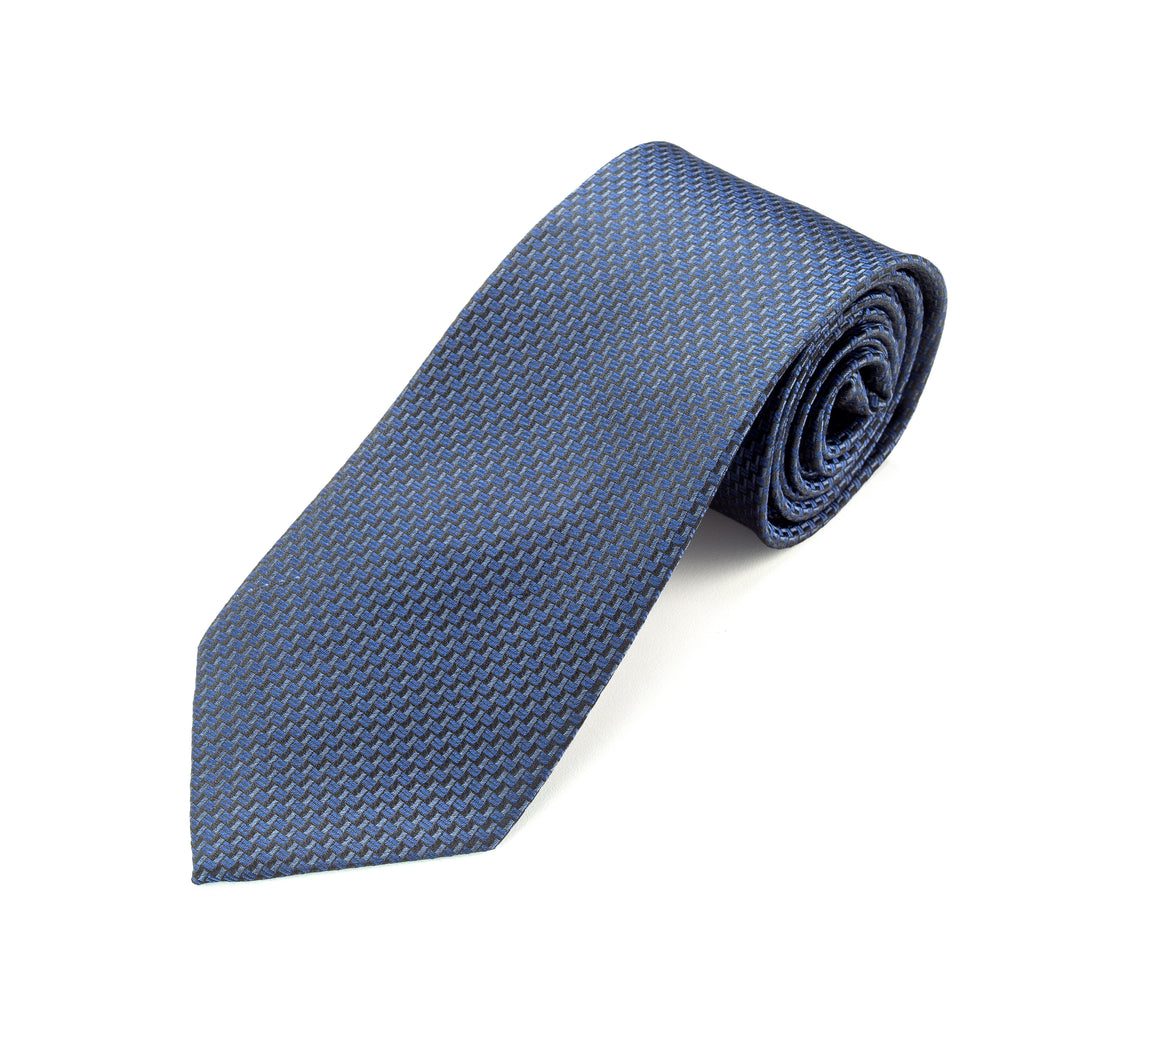 Project confidence and competence with this understated, elegant tie | 1754